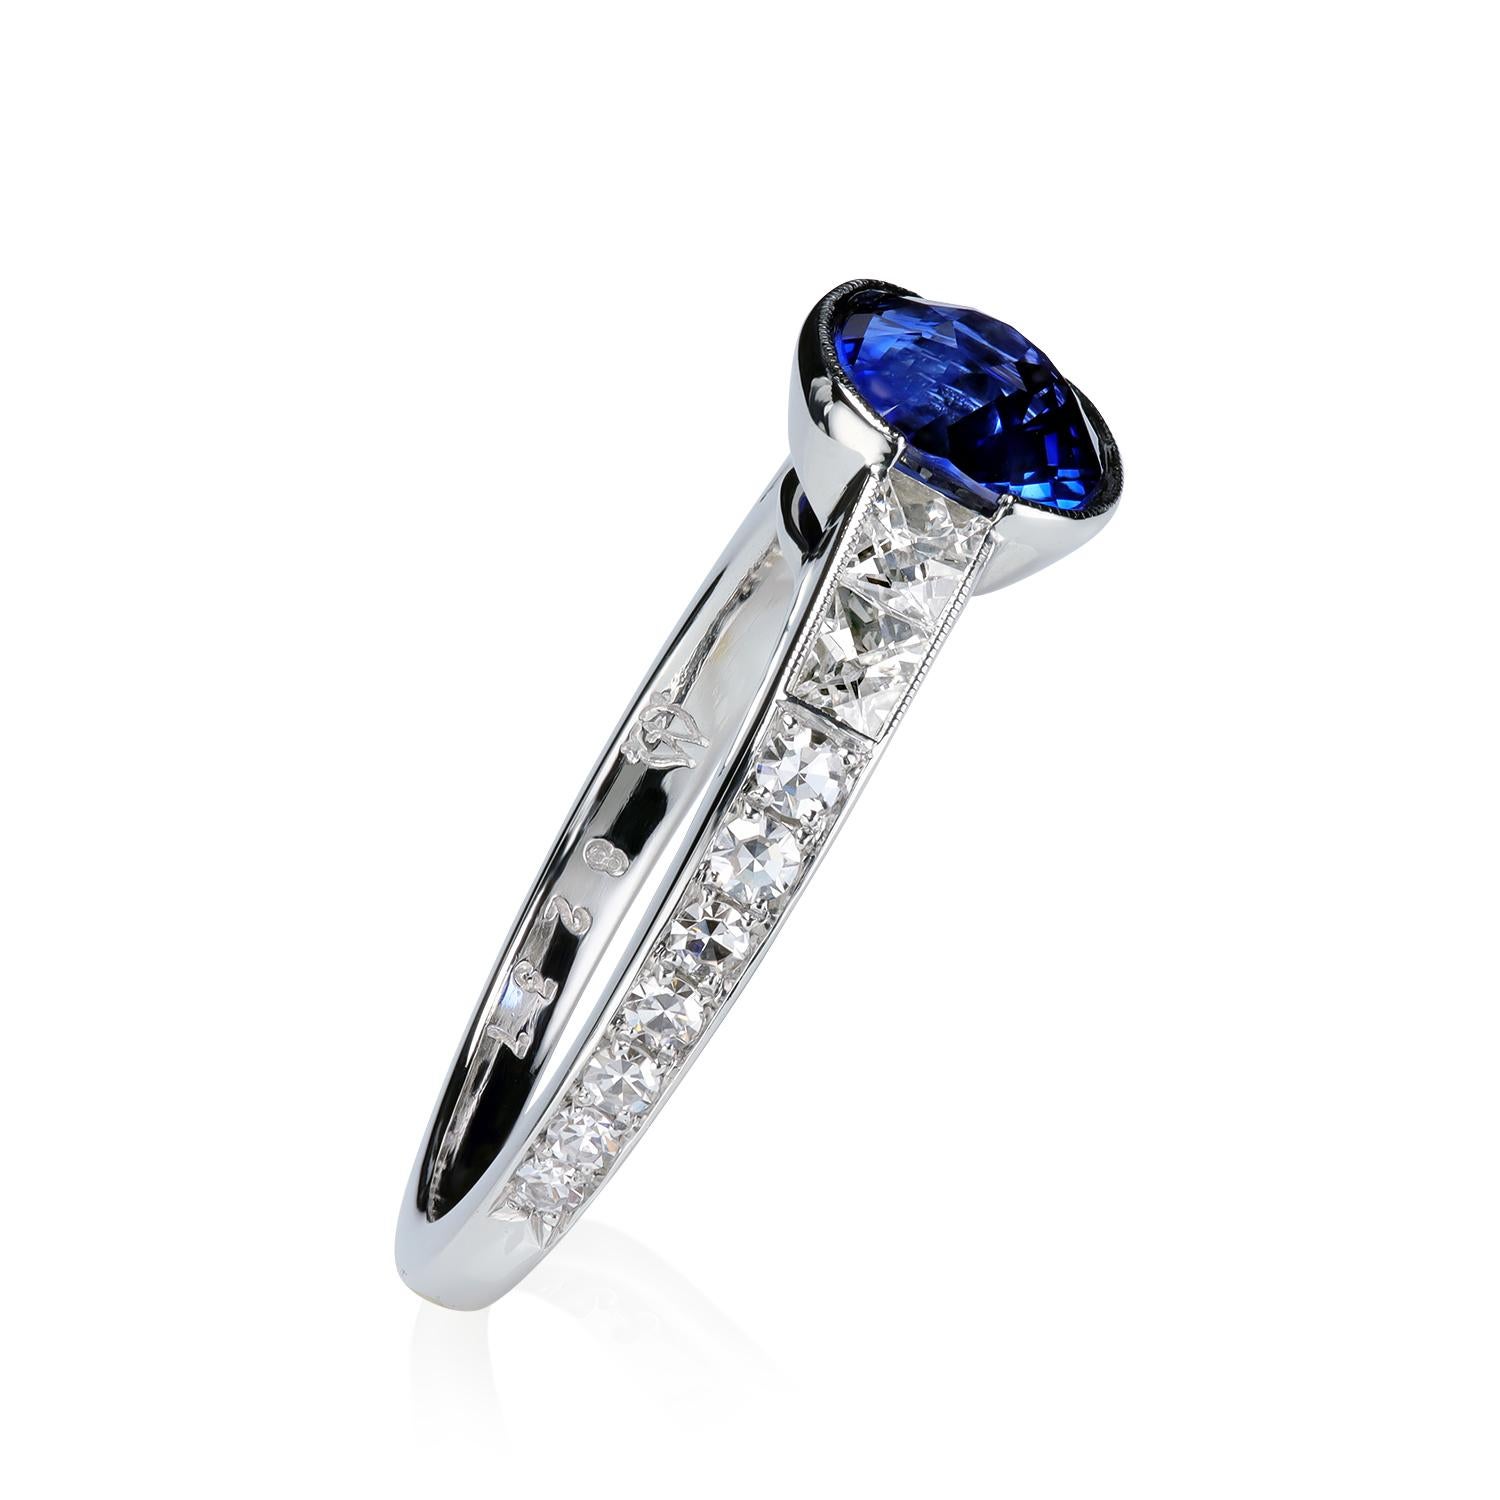 Beautiful Royal Blue 1.69 carats GIA-certified sapphire, certificate GIA 620478673, with channel-set French cut diamonds and bright-cut pave. Vintage feel and look with milgrain detail.
French cut diamonds 0.37 carats TW
14 Single cut diamonds 0.26